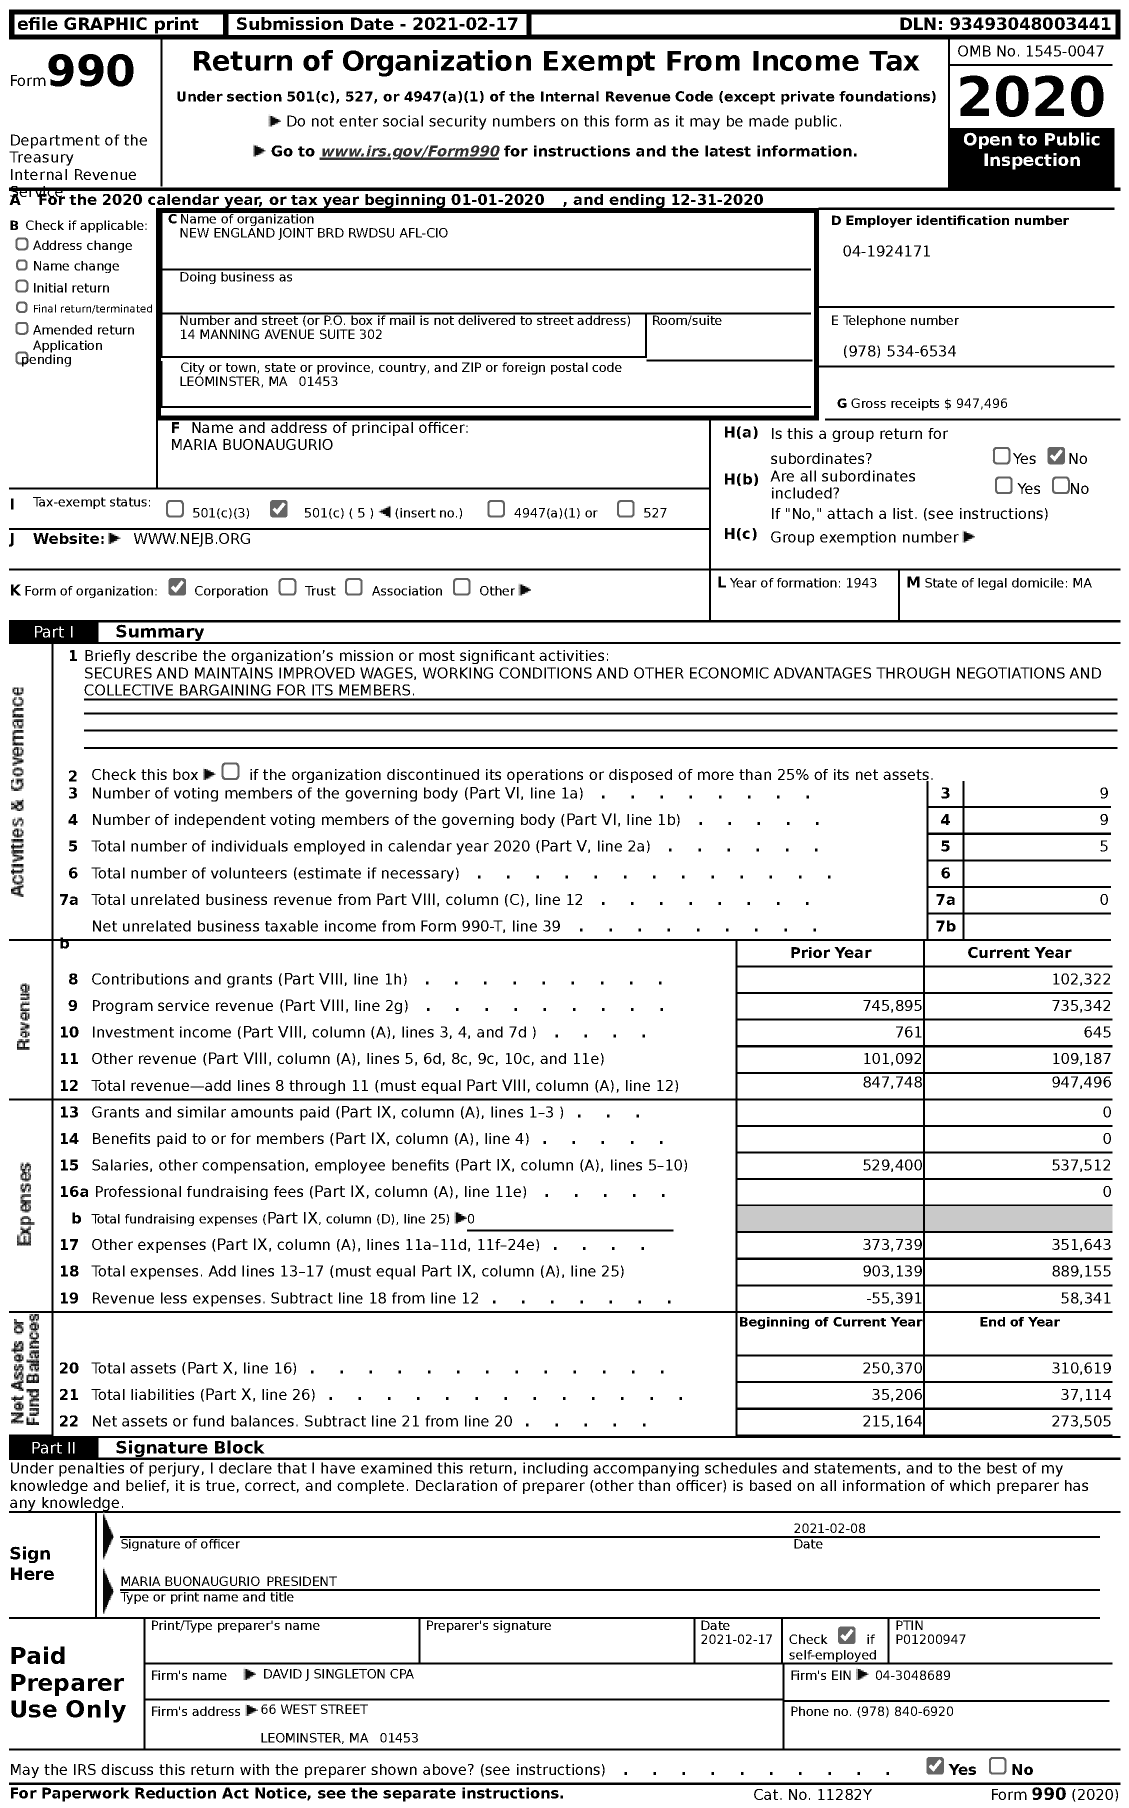 Image of first page of 2020 Form 990 for New England Joint BRD Rwdsu AFL-CIO